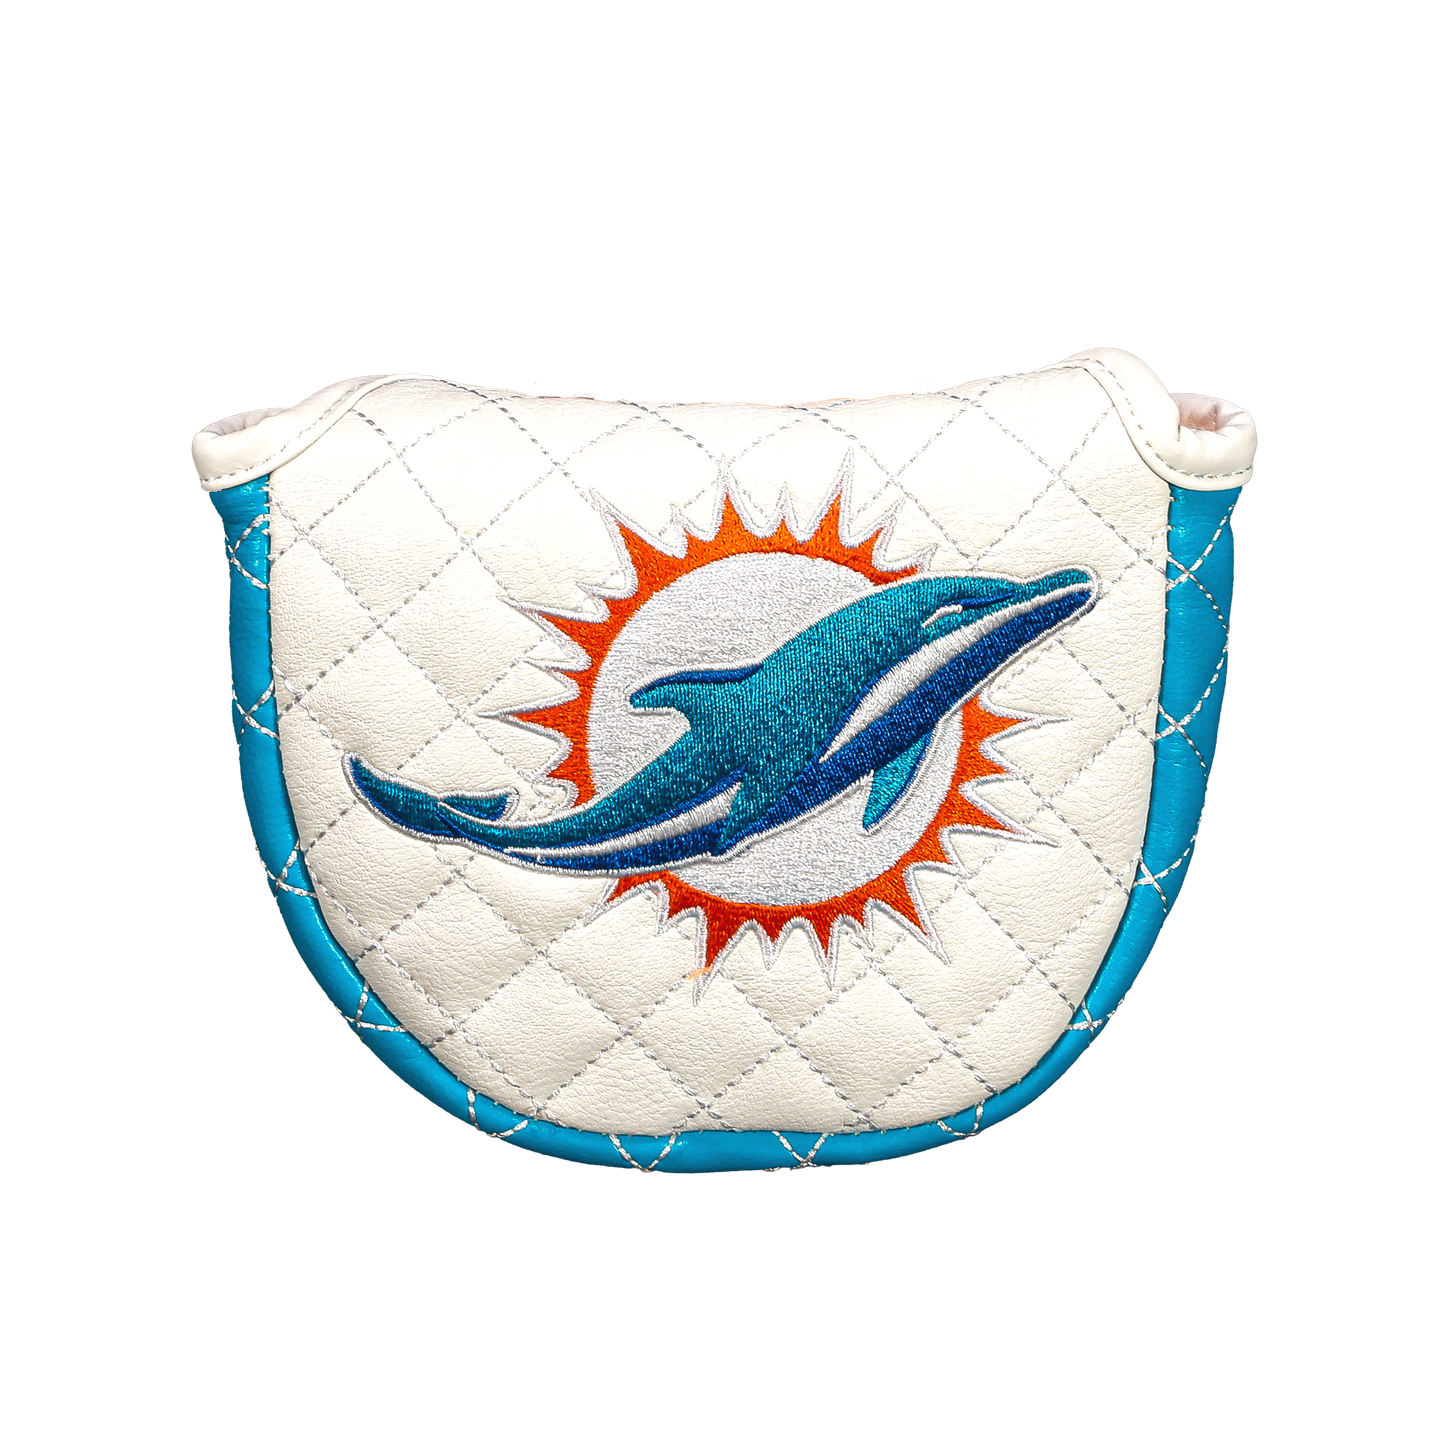 Miami "Dolphins" Mallet Putter Cover